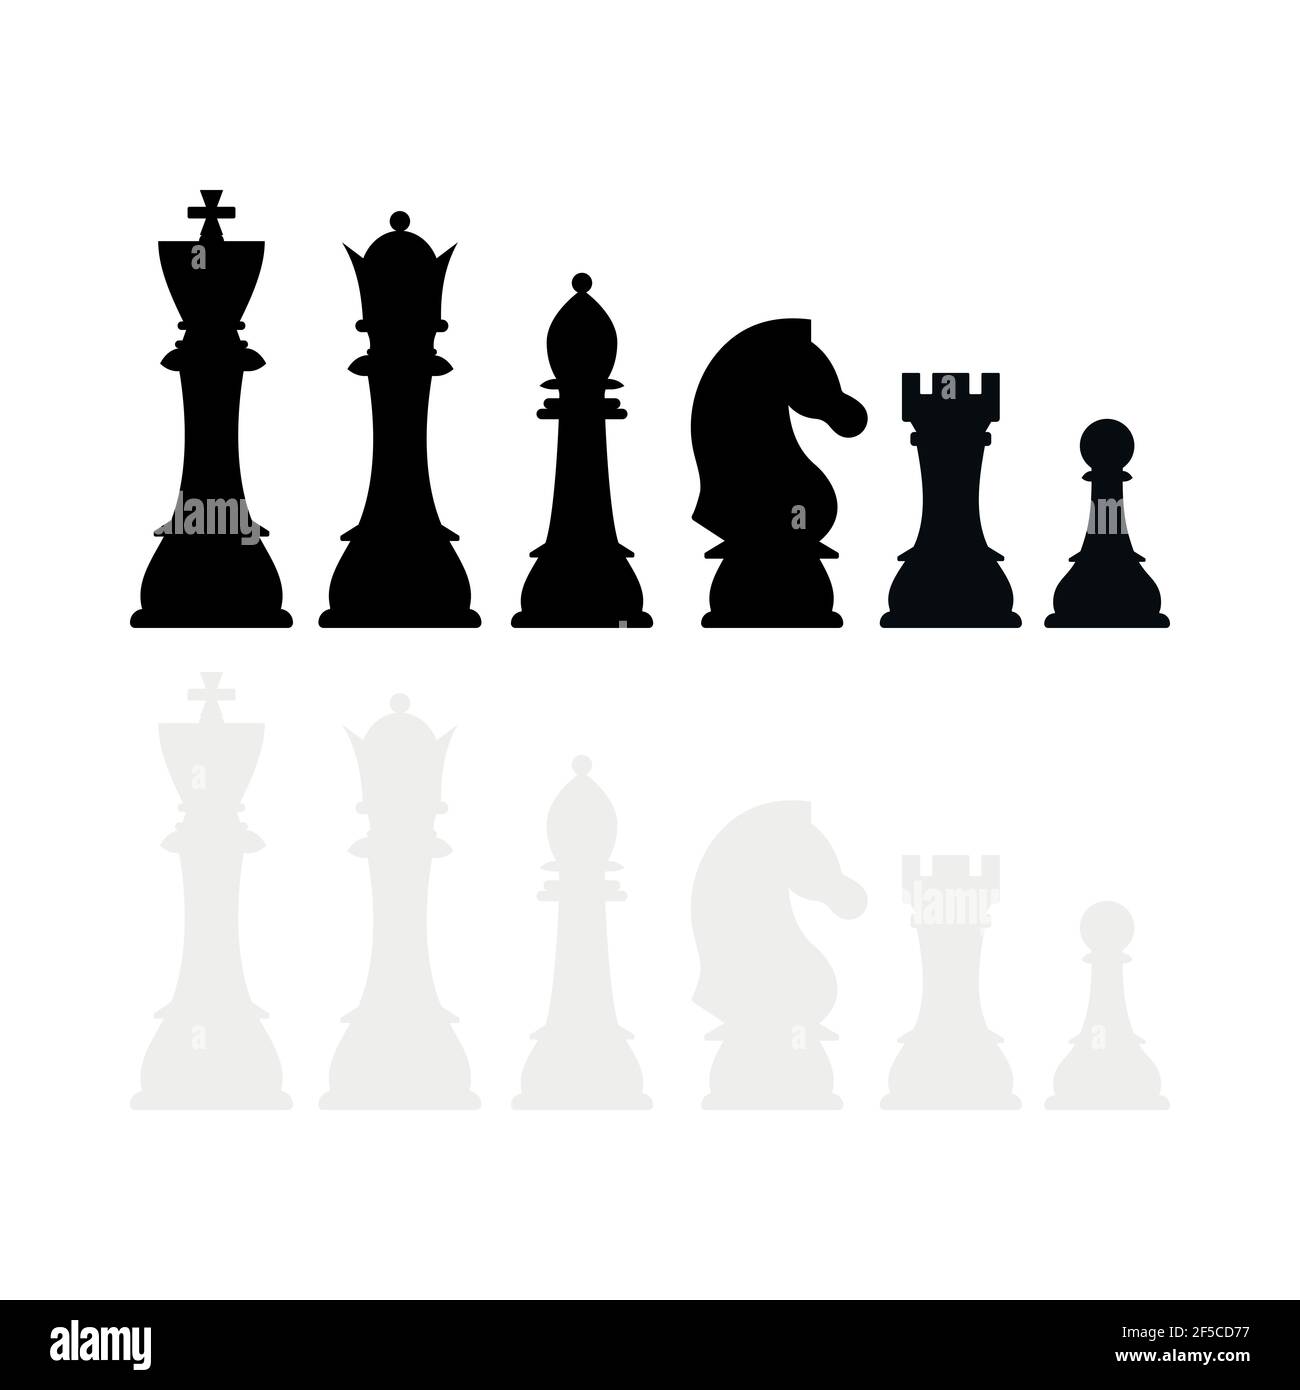 Chess board Stock Vector Images - Alamy